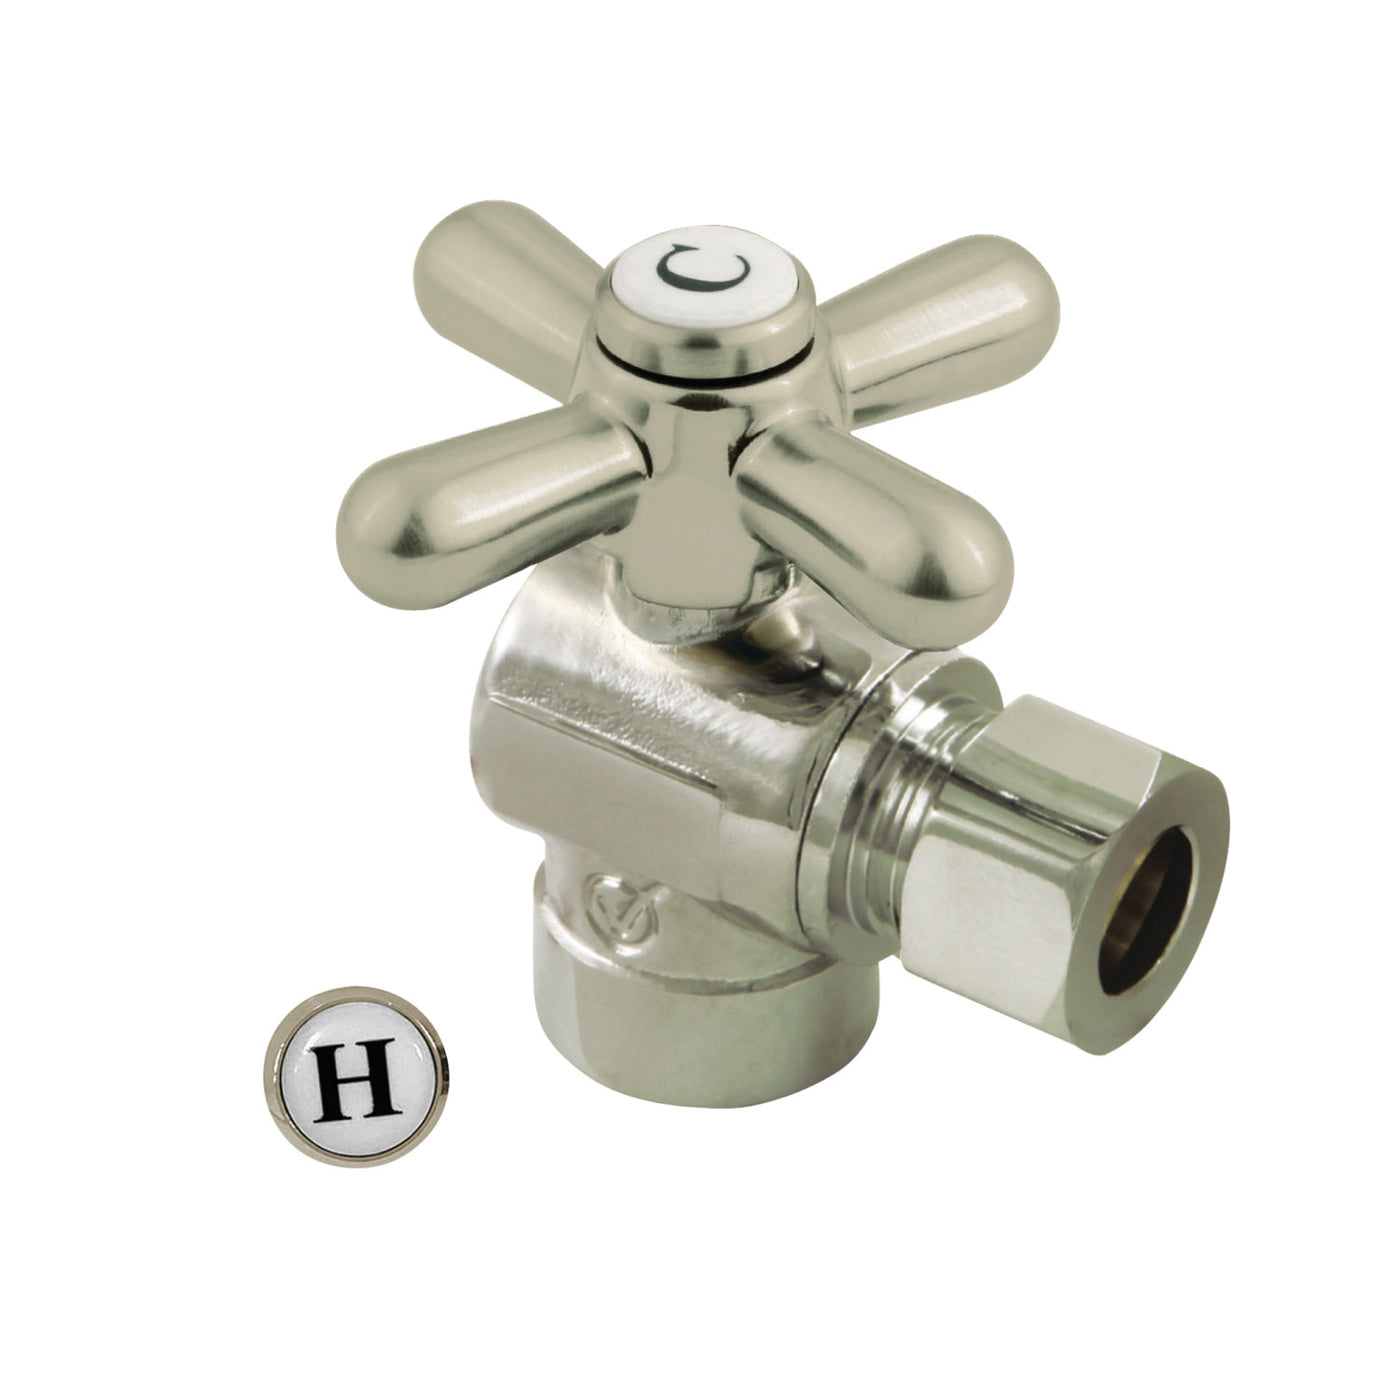 Elements of Design ECC43208X 1/2-Inch Sweat x 3/8-Inch OD Comp Angle Stop Valve, Brushed Nickel